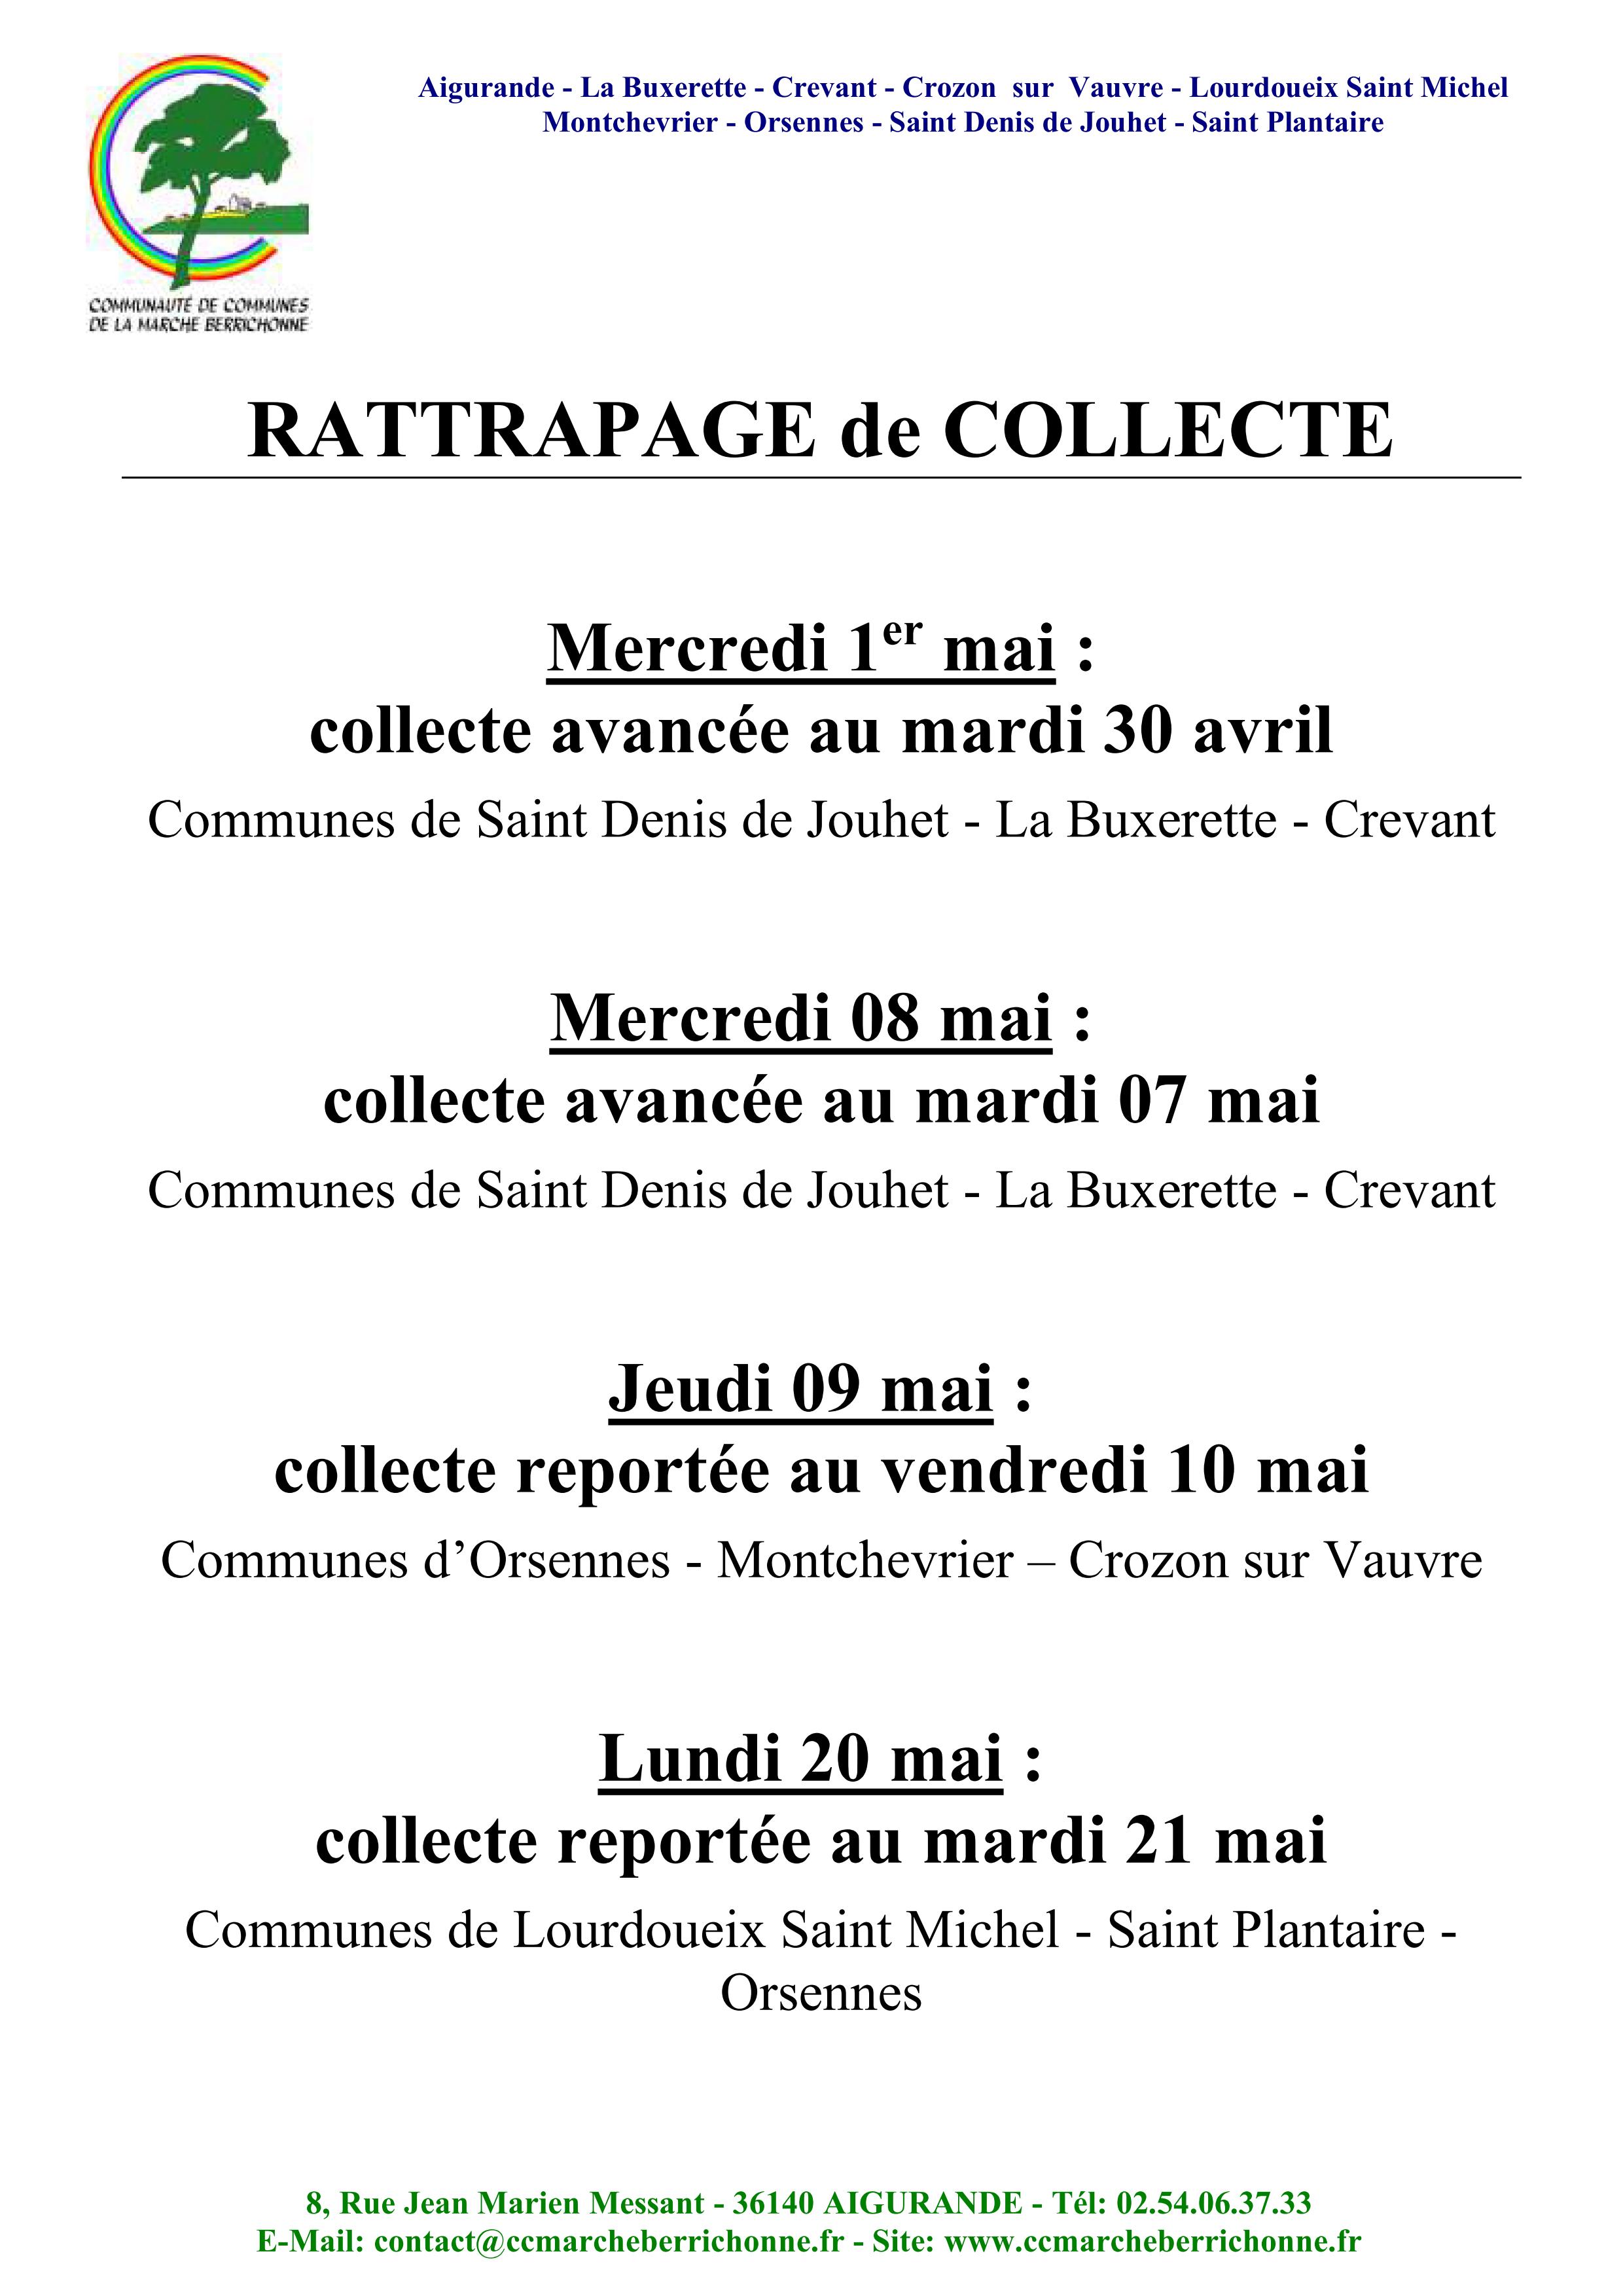 Rattrapages collectes 